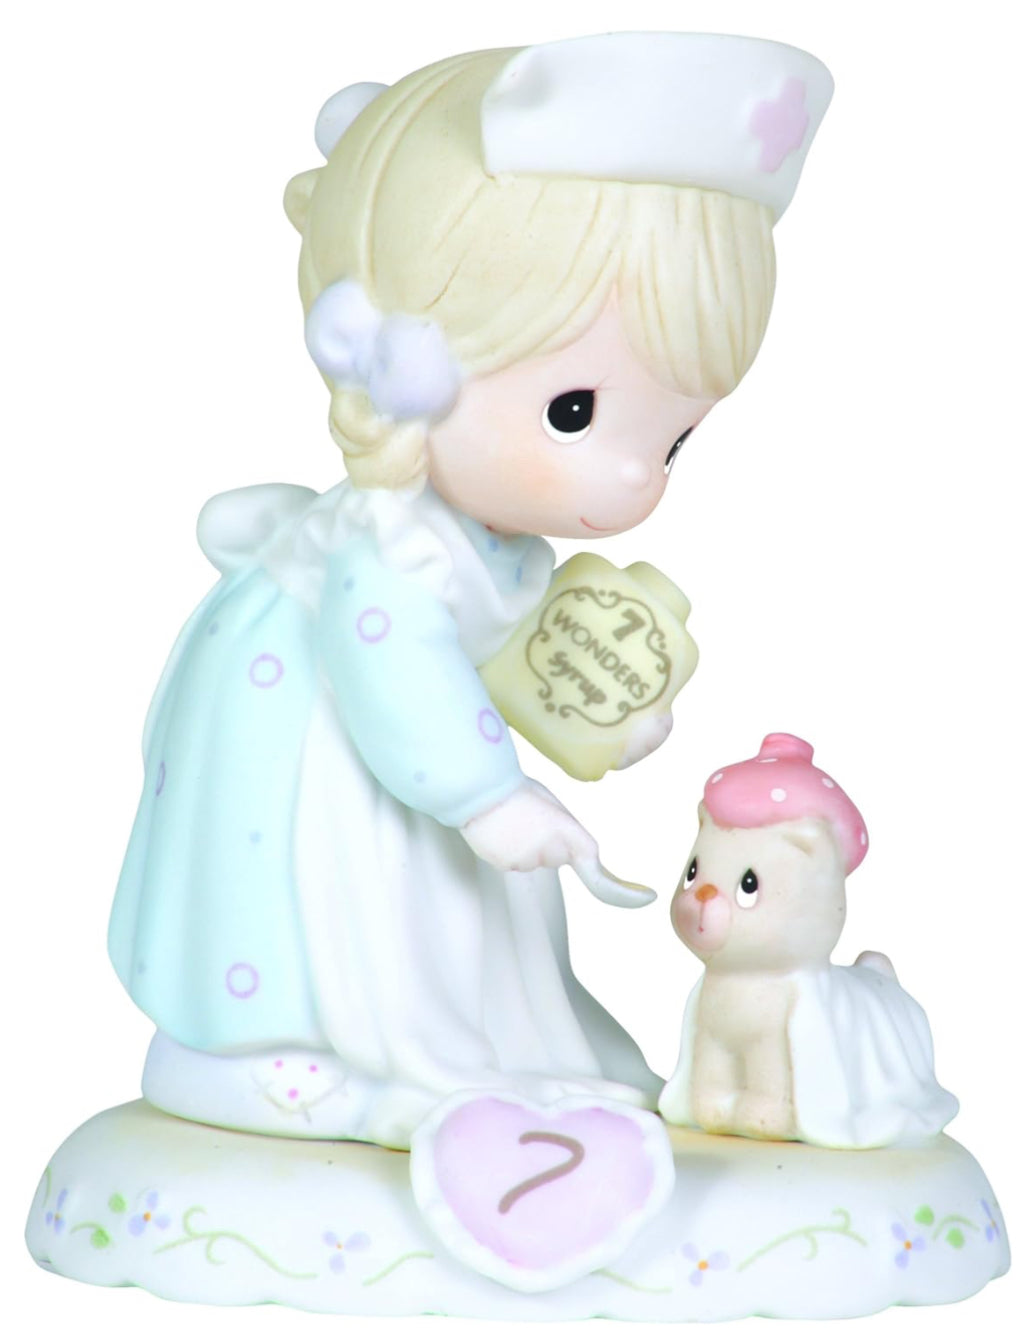 Growing in Grace Age 7 - Precious Moment Figurine 163740